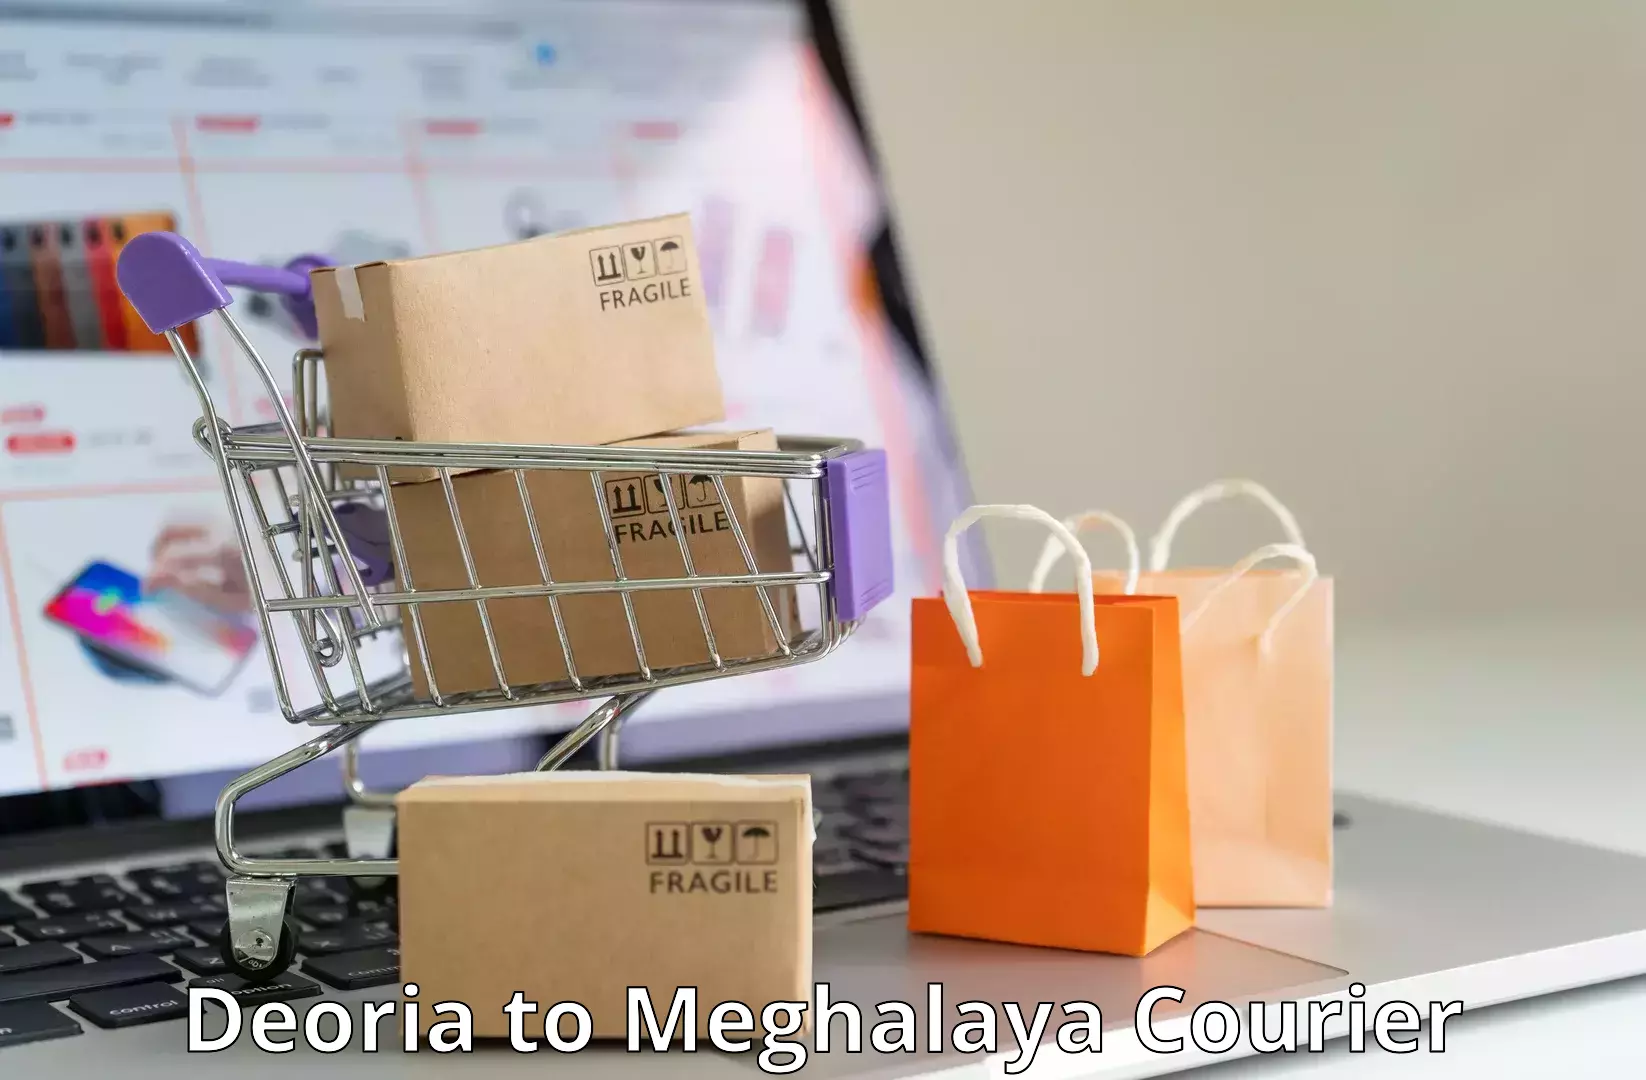 Nationwide courier service Deoria to Meghalaya